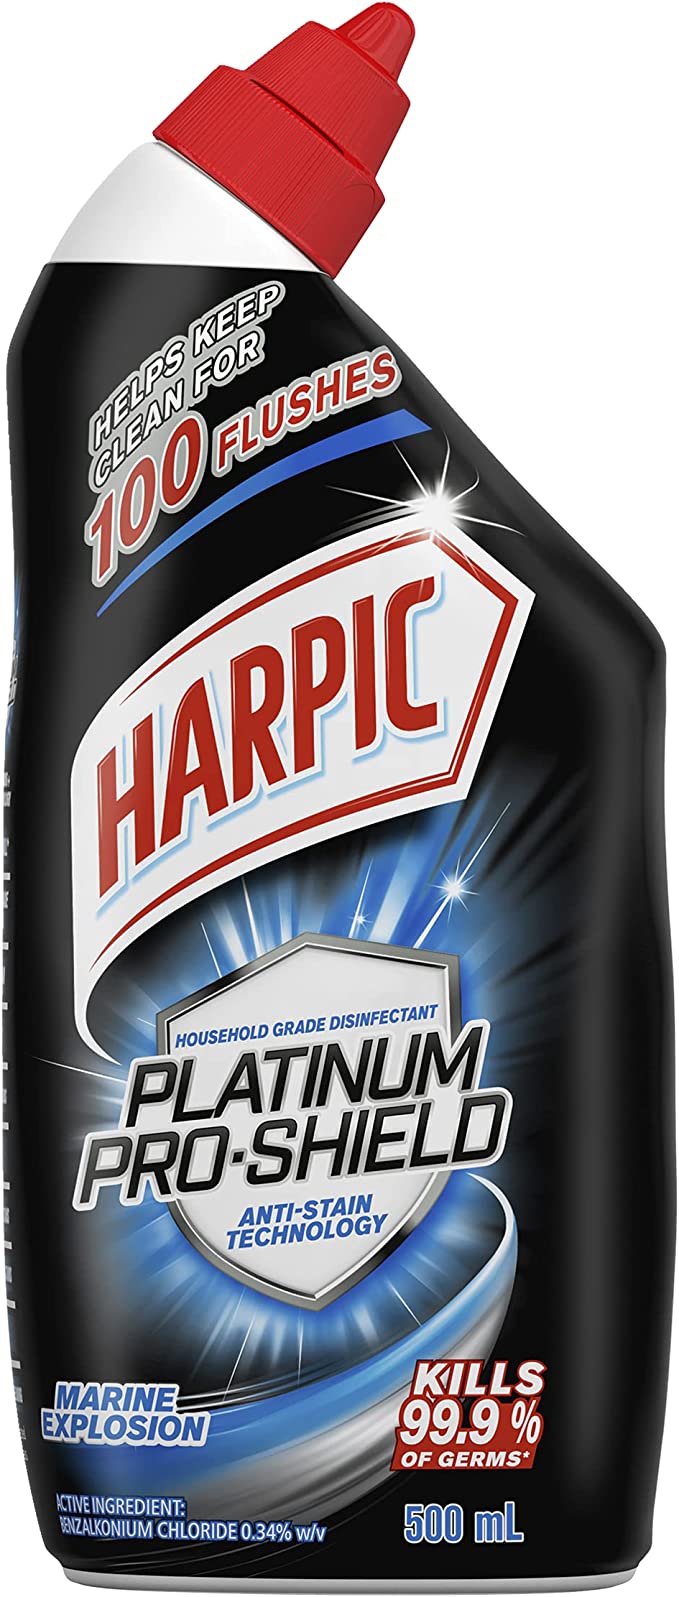 Harpic Platinum Pro-Shield Anti-Stain Technology Toilet Cleaner, Marine Explosion 500mL (Pack of 8)